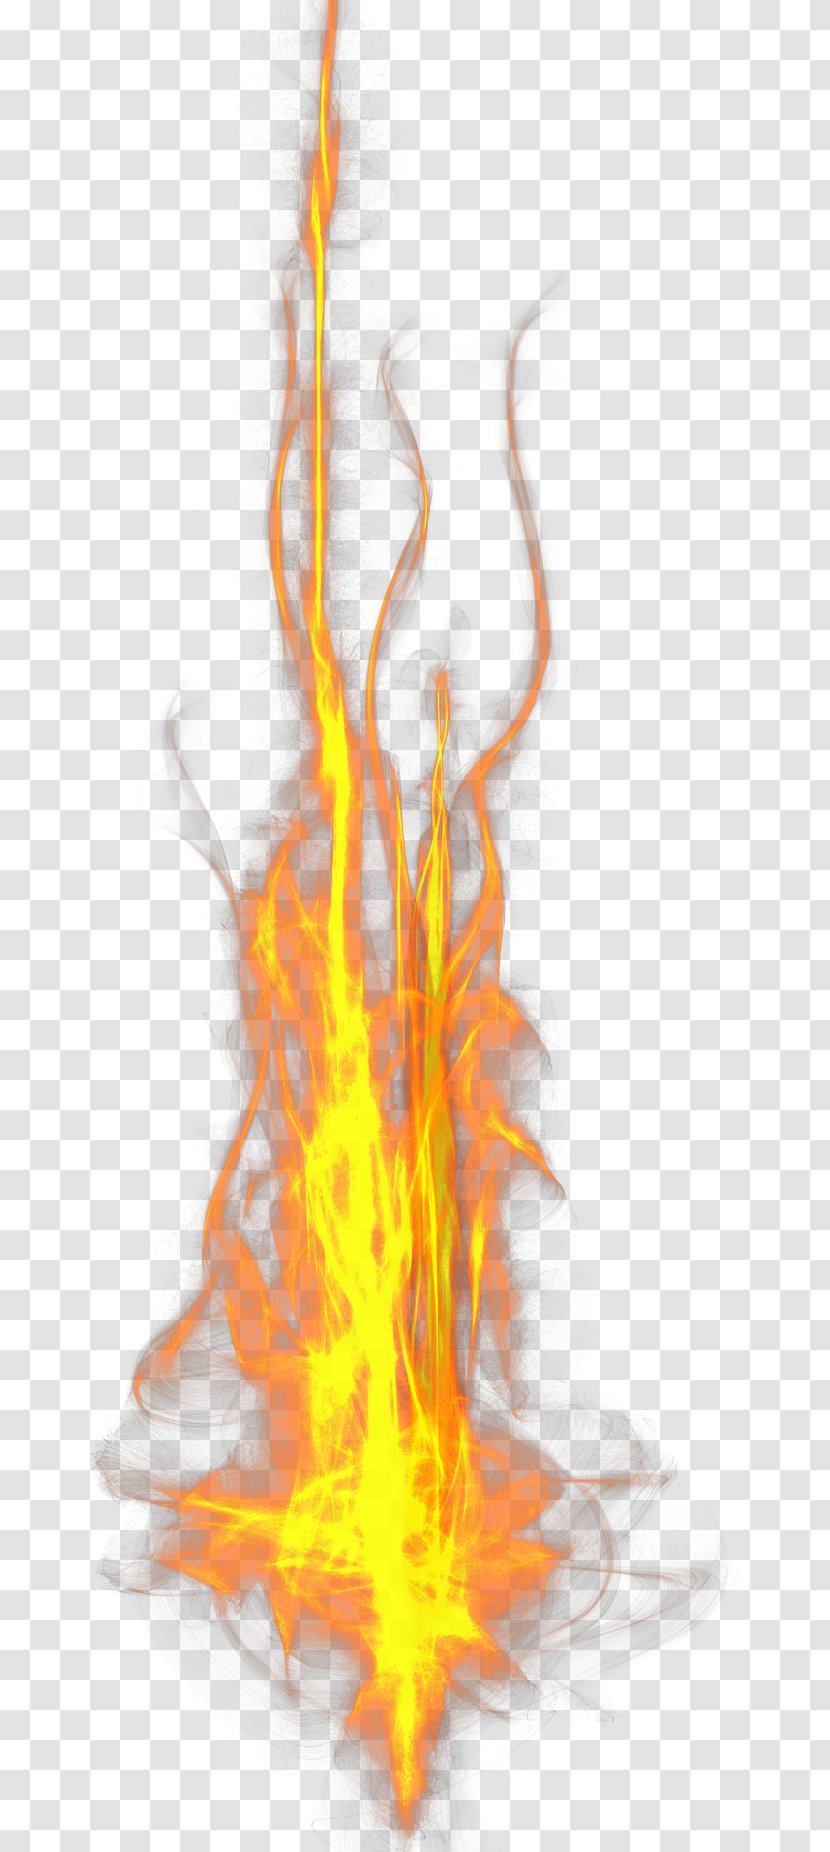 Light Flame Fire Icon - Watermark Transparent PNG